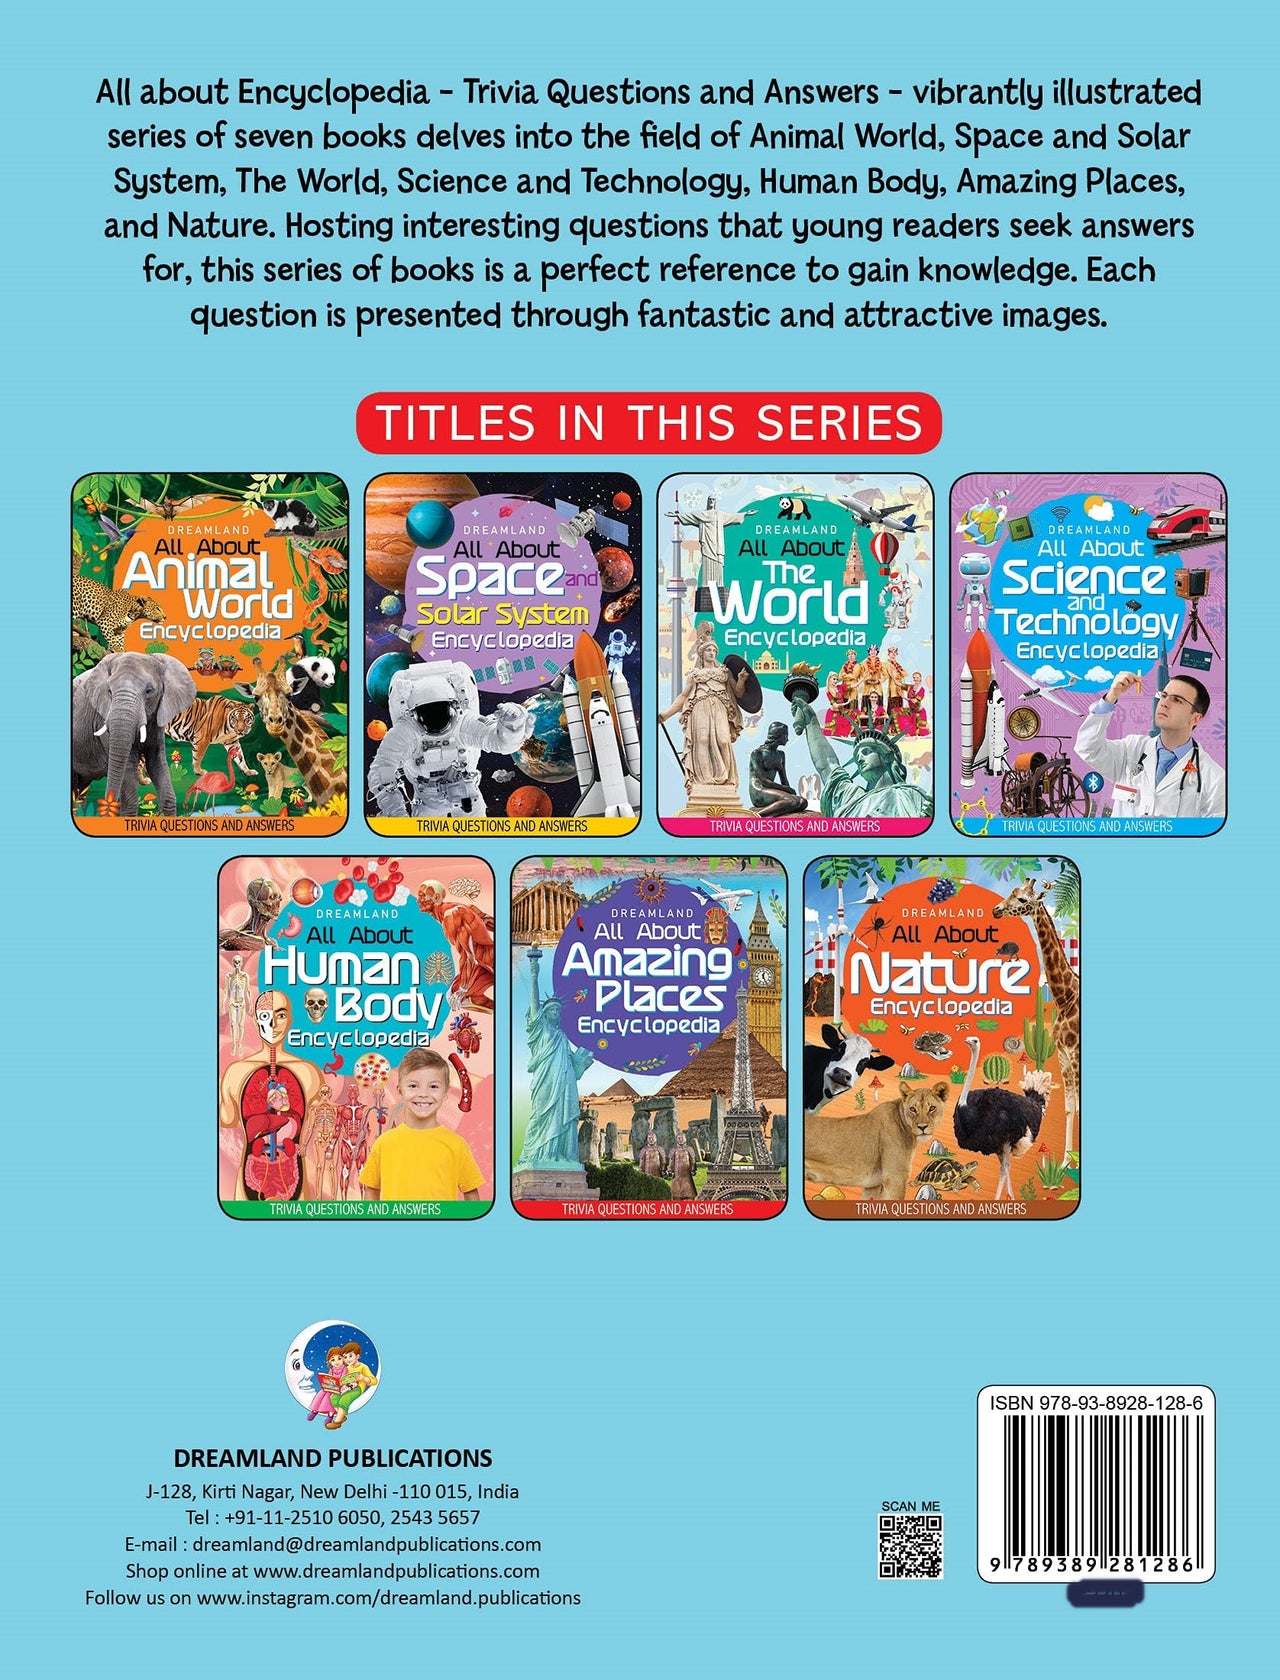 Dreamland Amazing Places Encyclopedia for Children Age 5 - 15 Years- All About Trivia Questions and Answers - Distacart